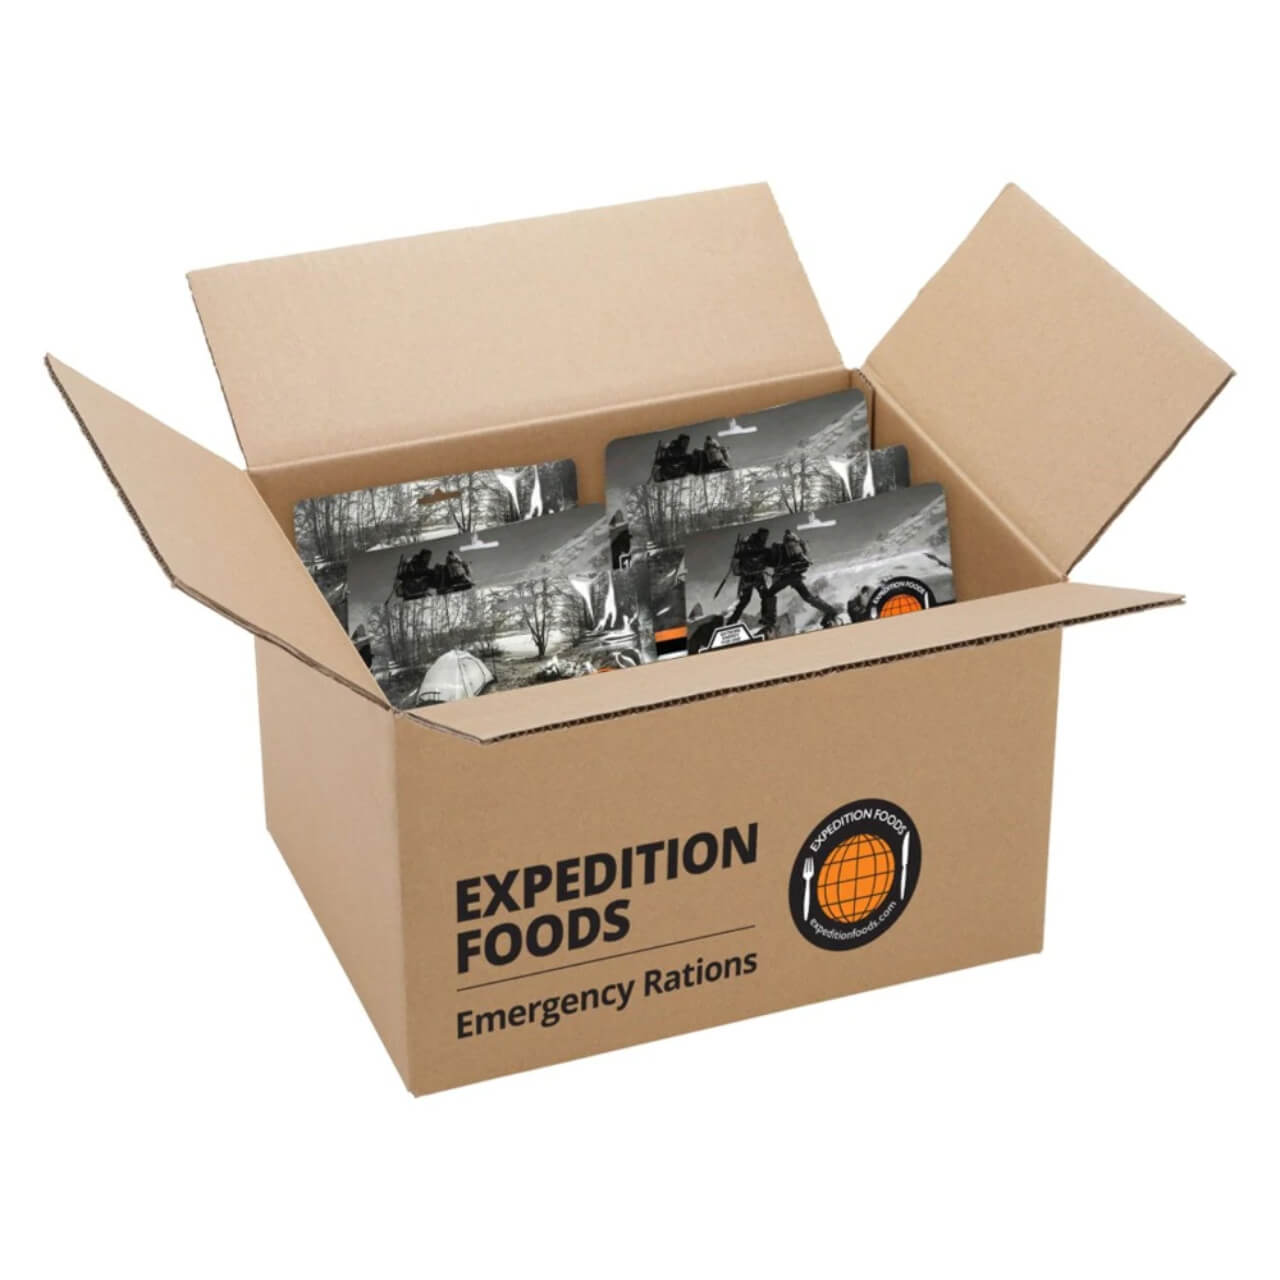 1 Week to 12 Months Worth of Emergency Food Rations - Expedition Foods